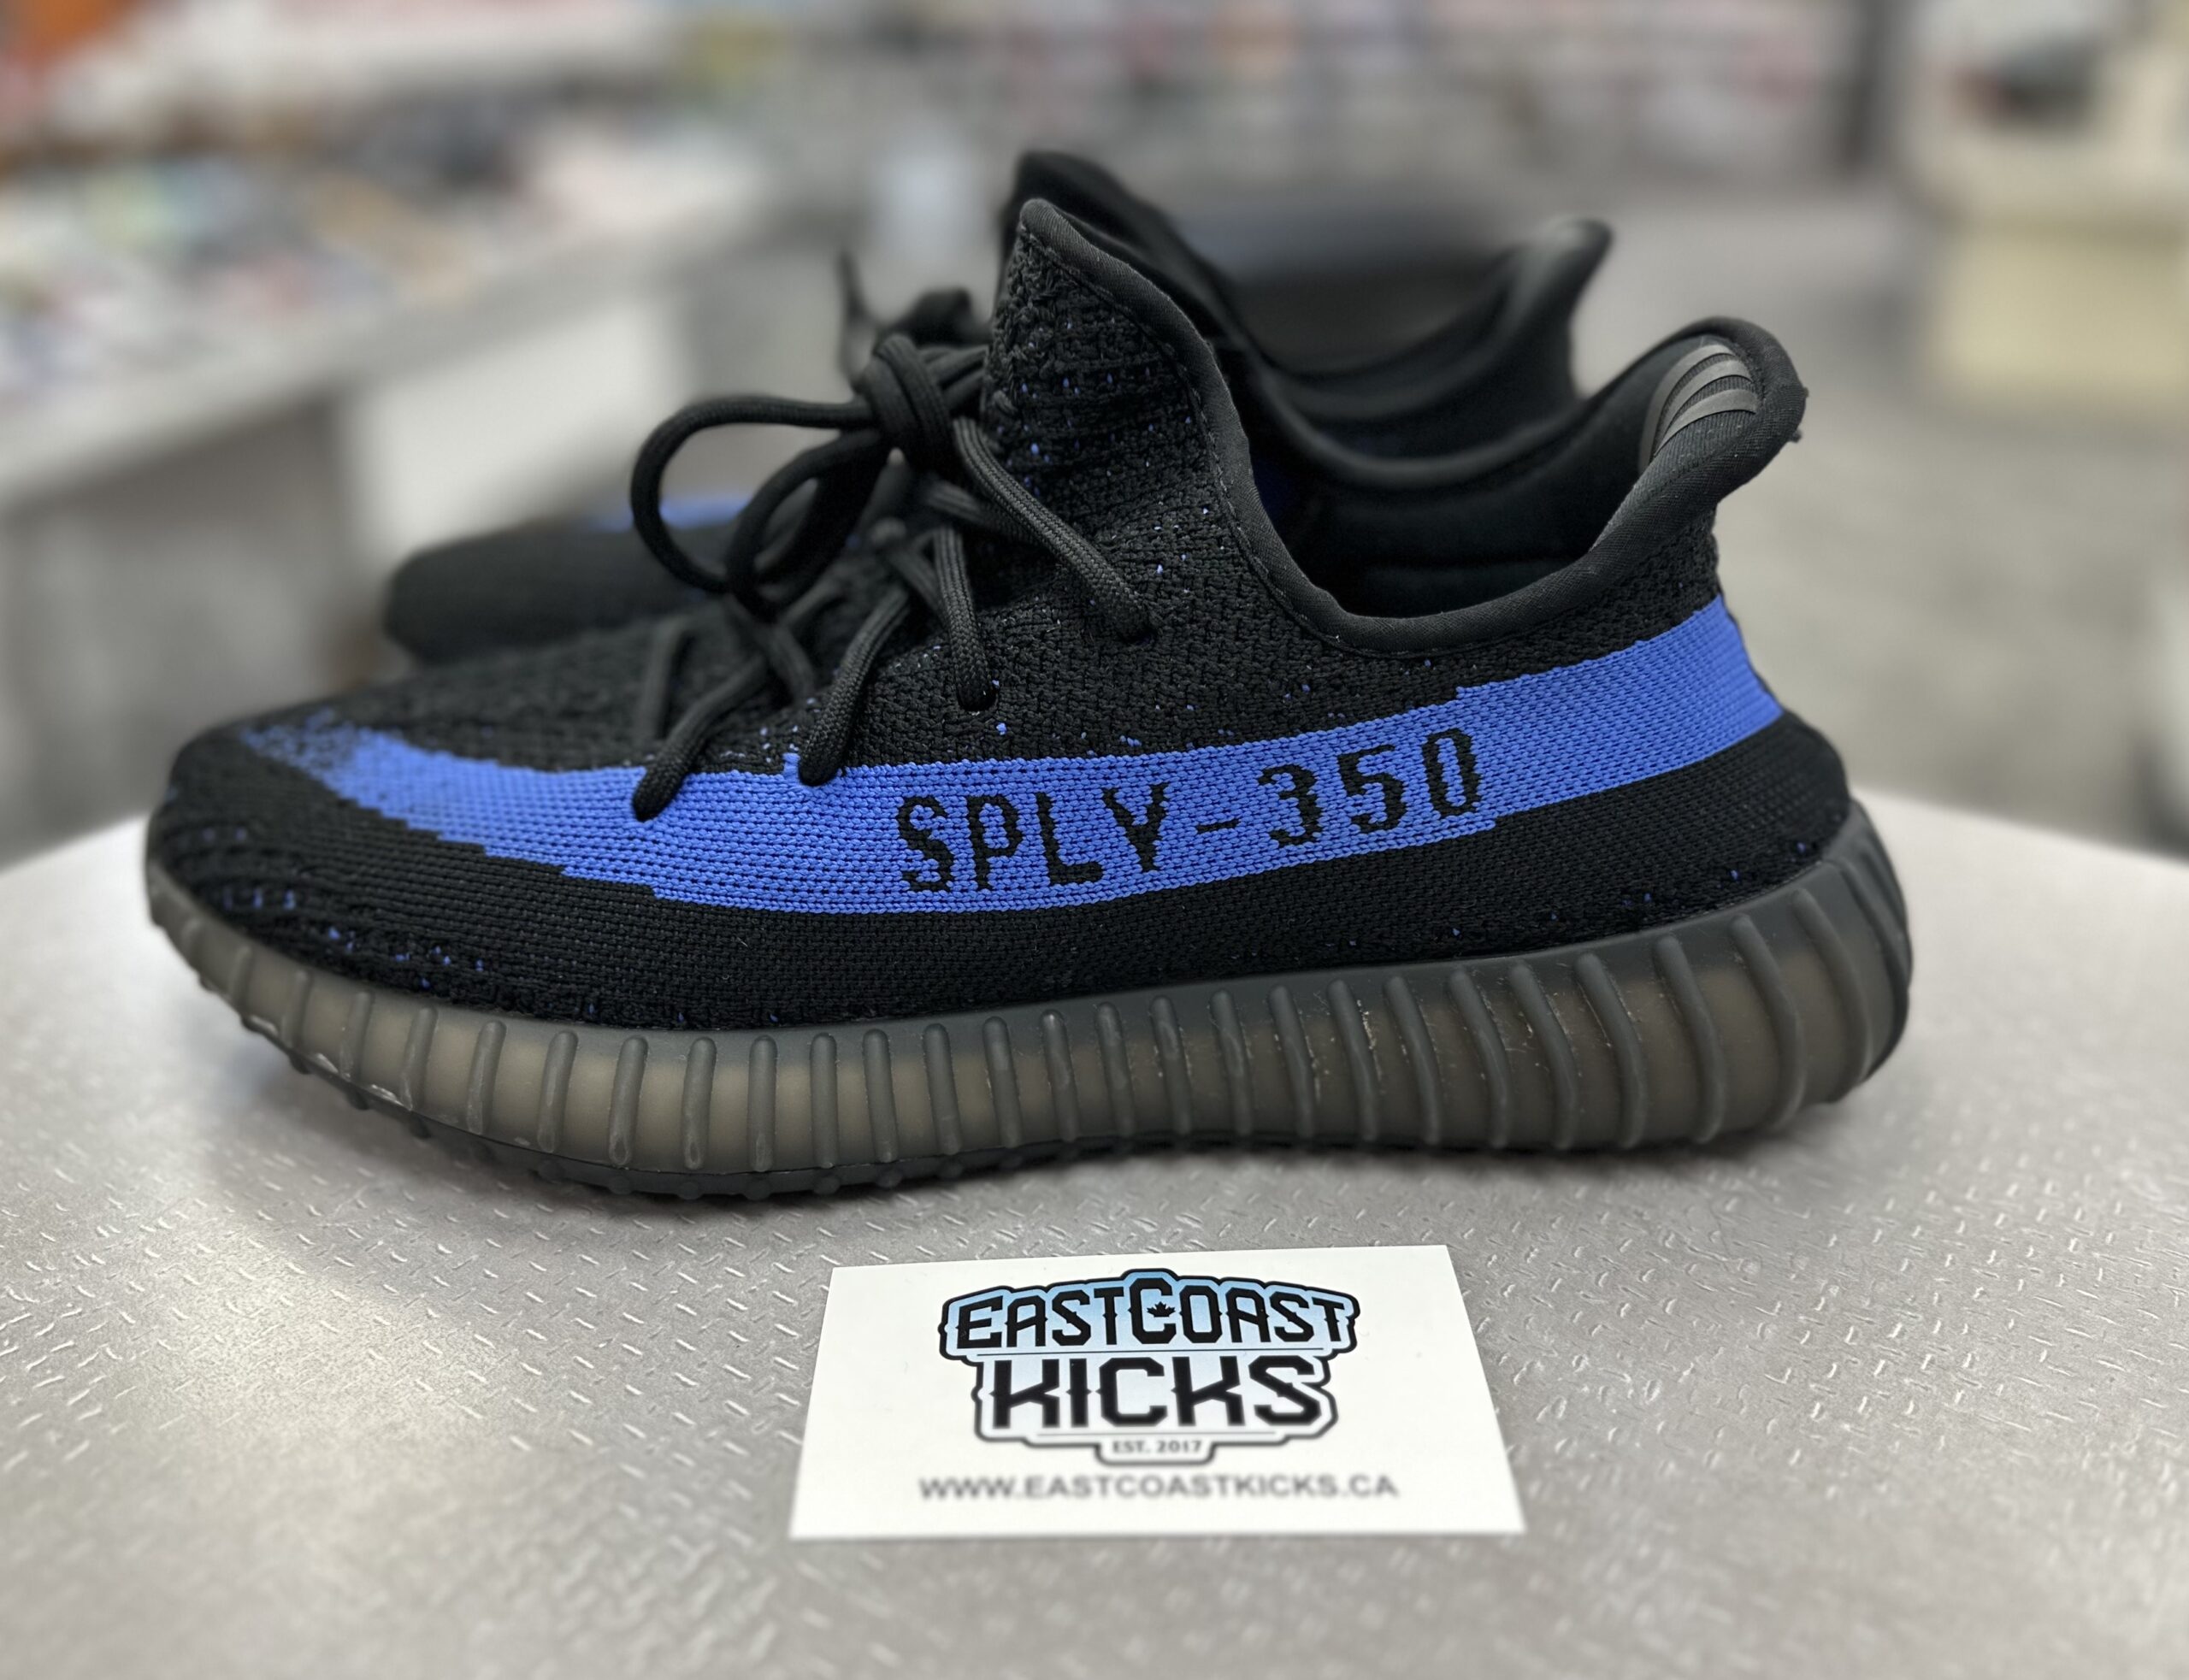 Preowned Adidas Yeezy Boost 350 V2 Dazzling Blue Size 9